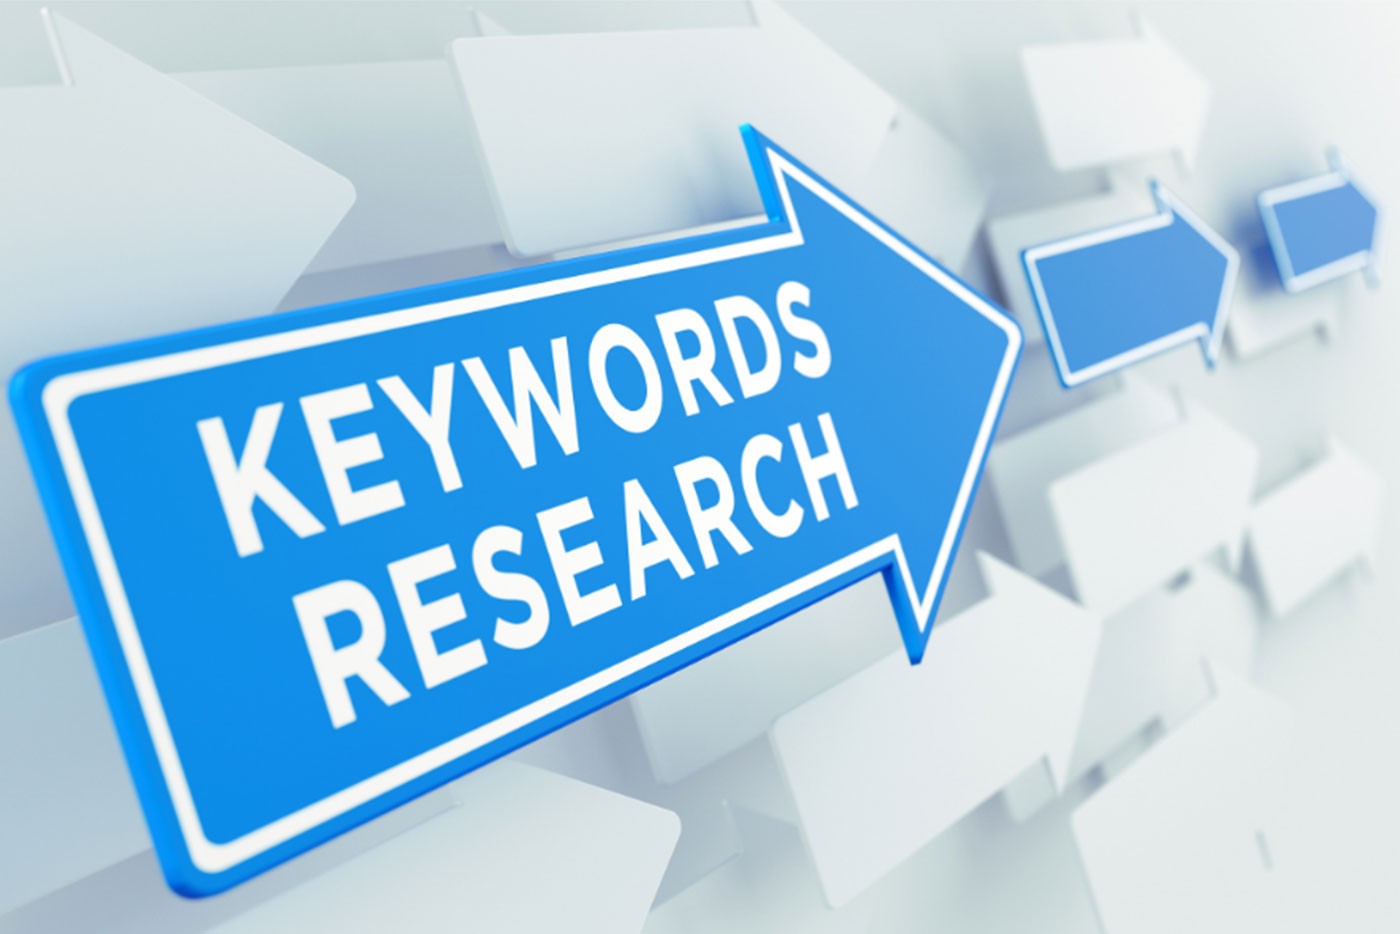 The Ultimate Keyword Research Tool Learn With Diib